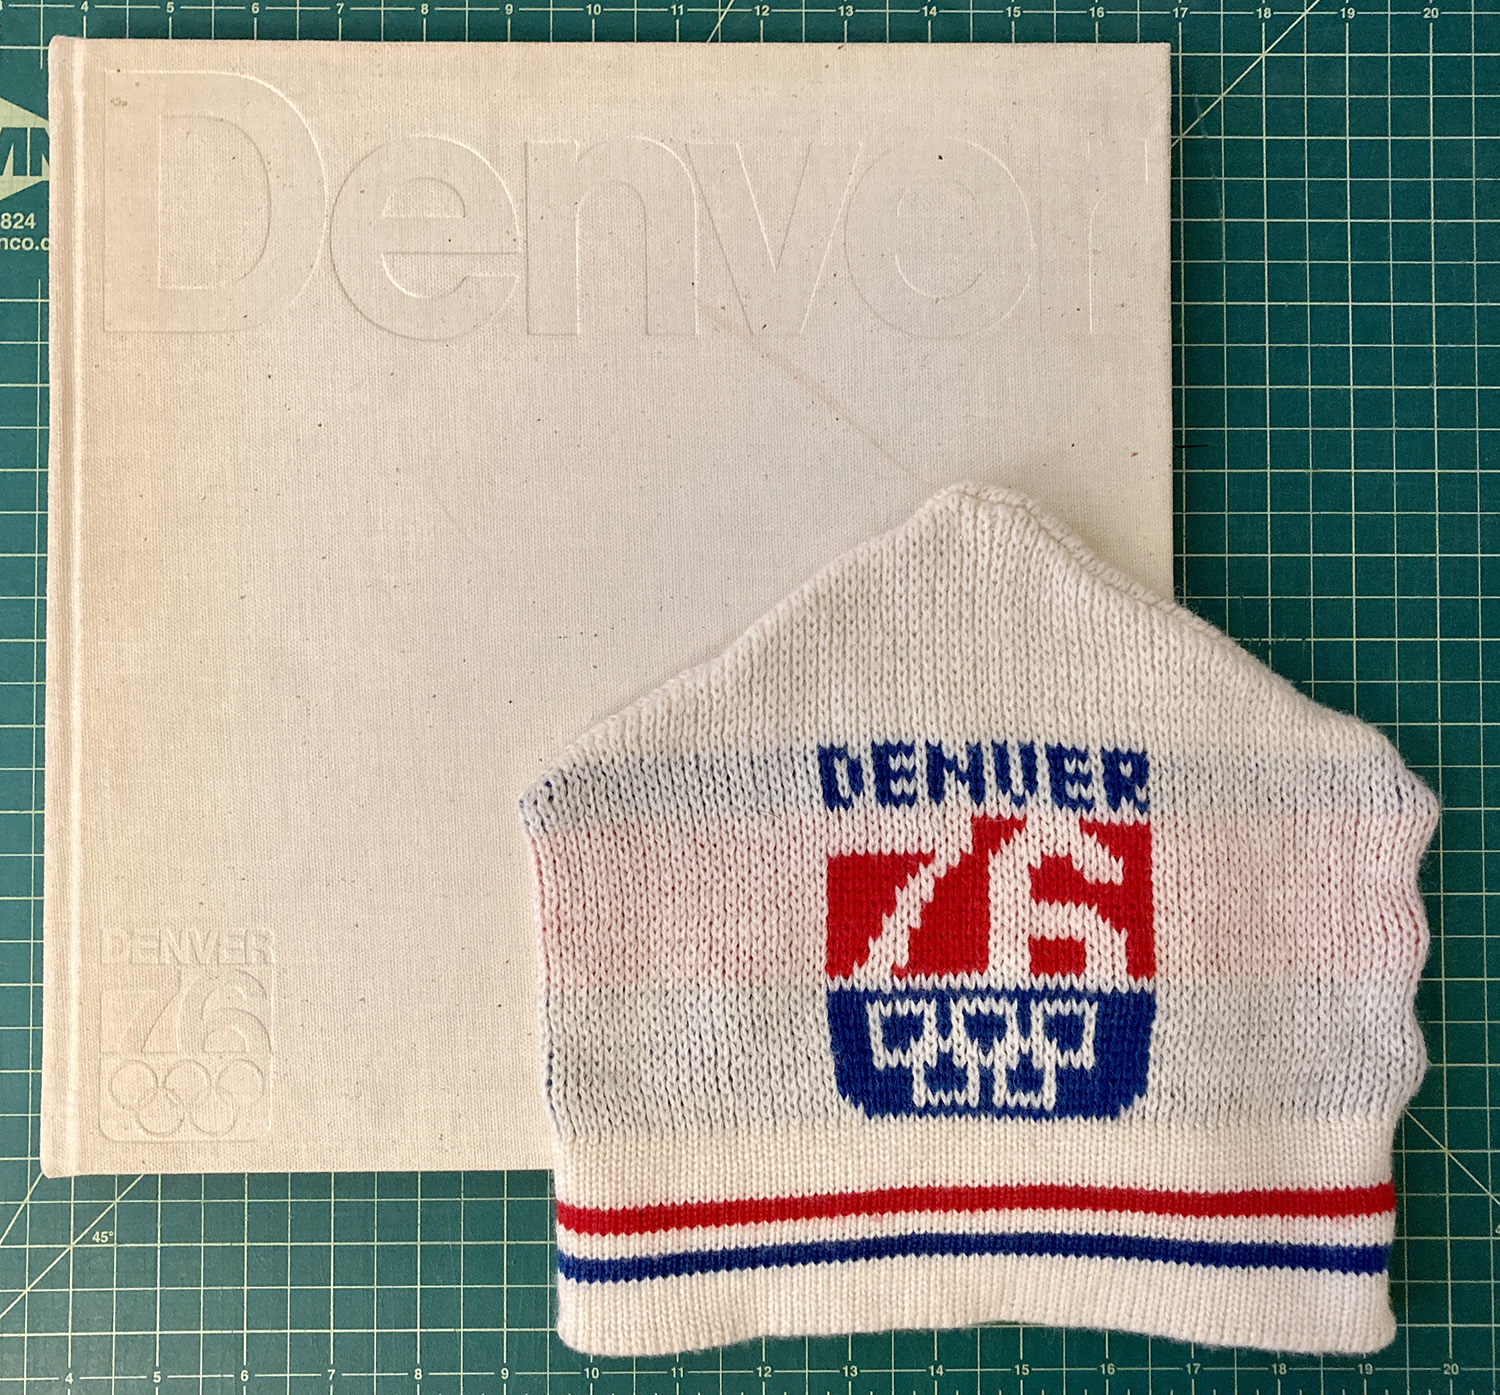 My personal Denver 76 collection which includes “The City” bid book and a beanie